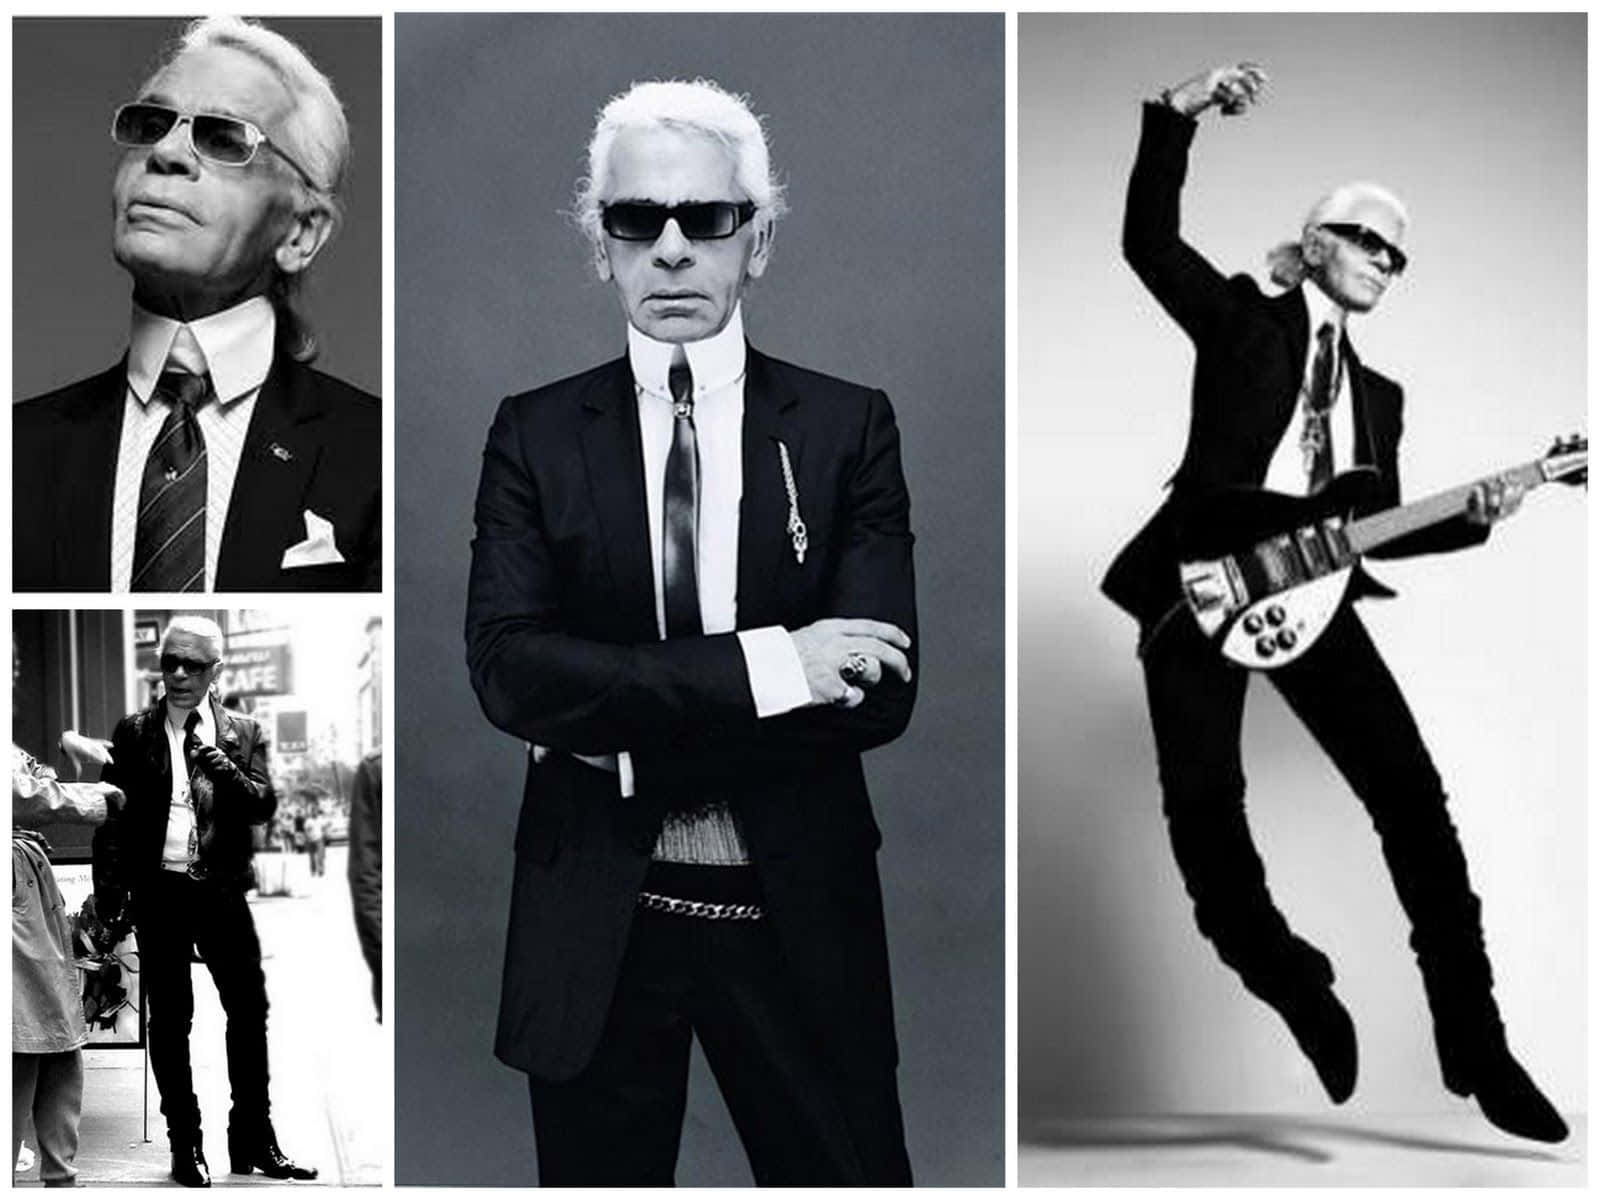 Karl Lagerfeld presents the latest Chanel collection Wallpaper